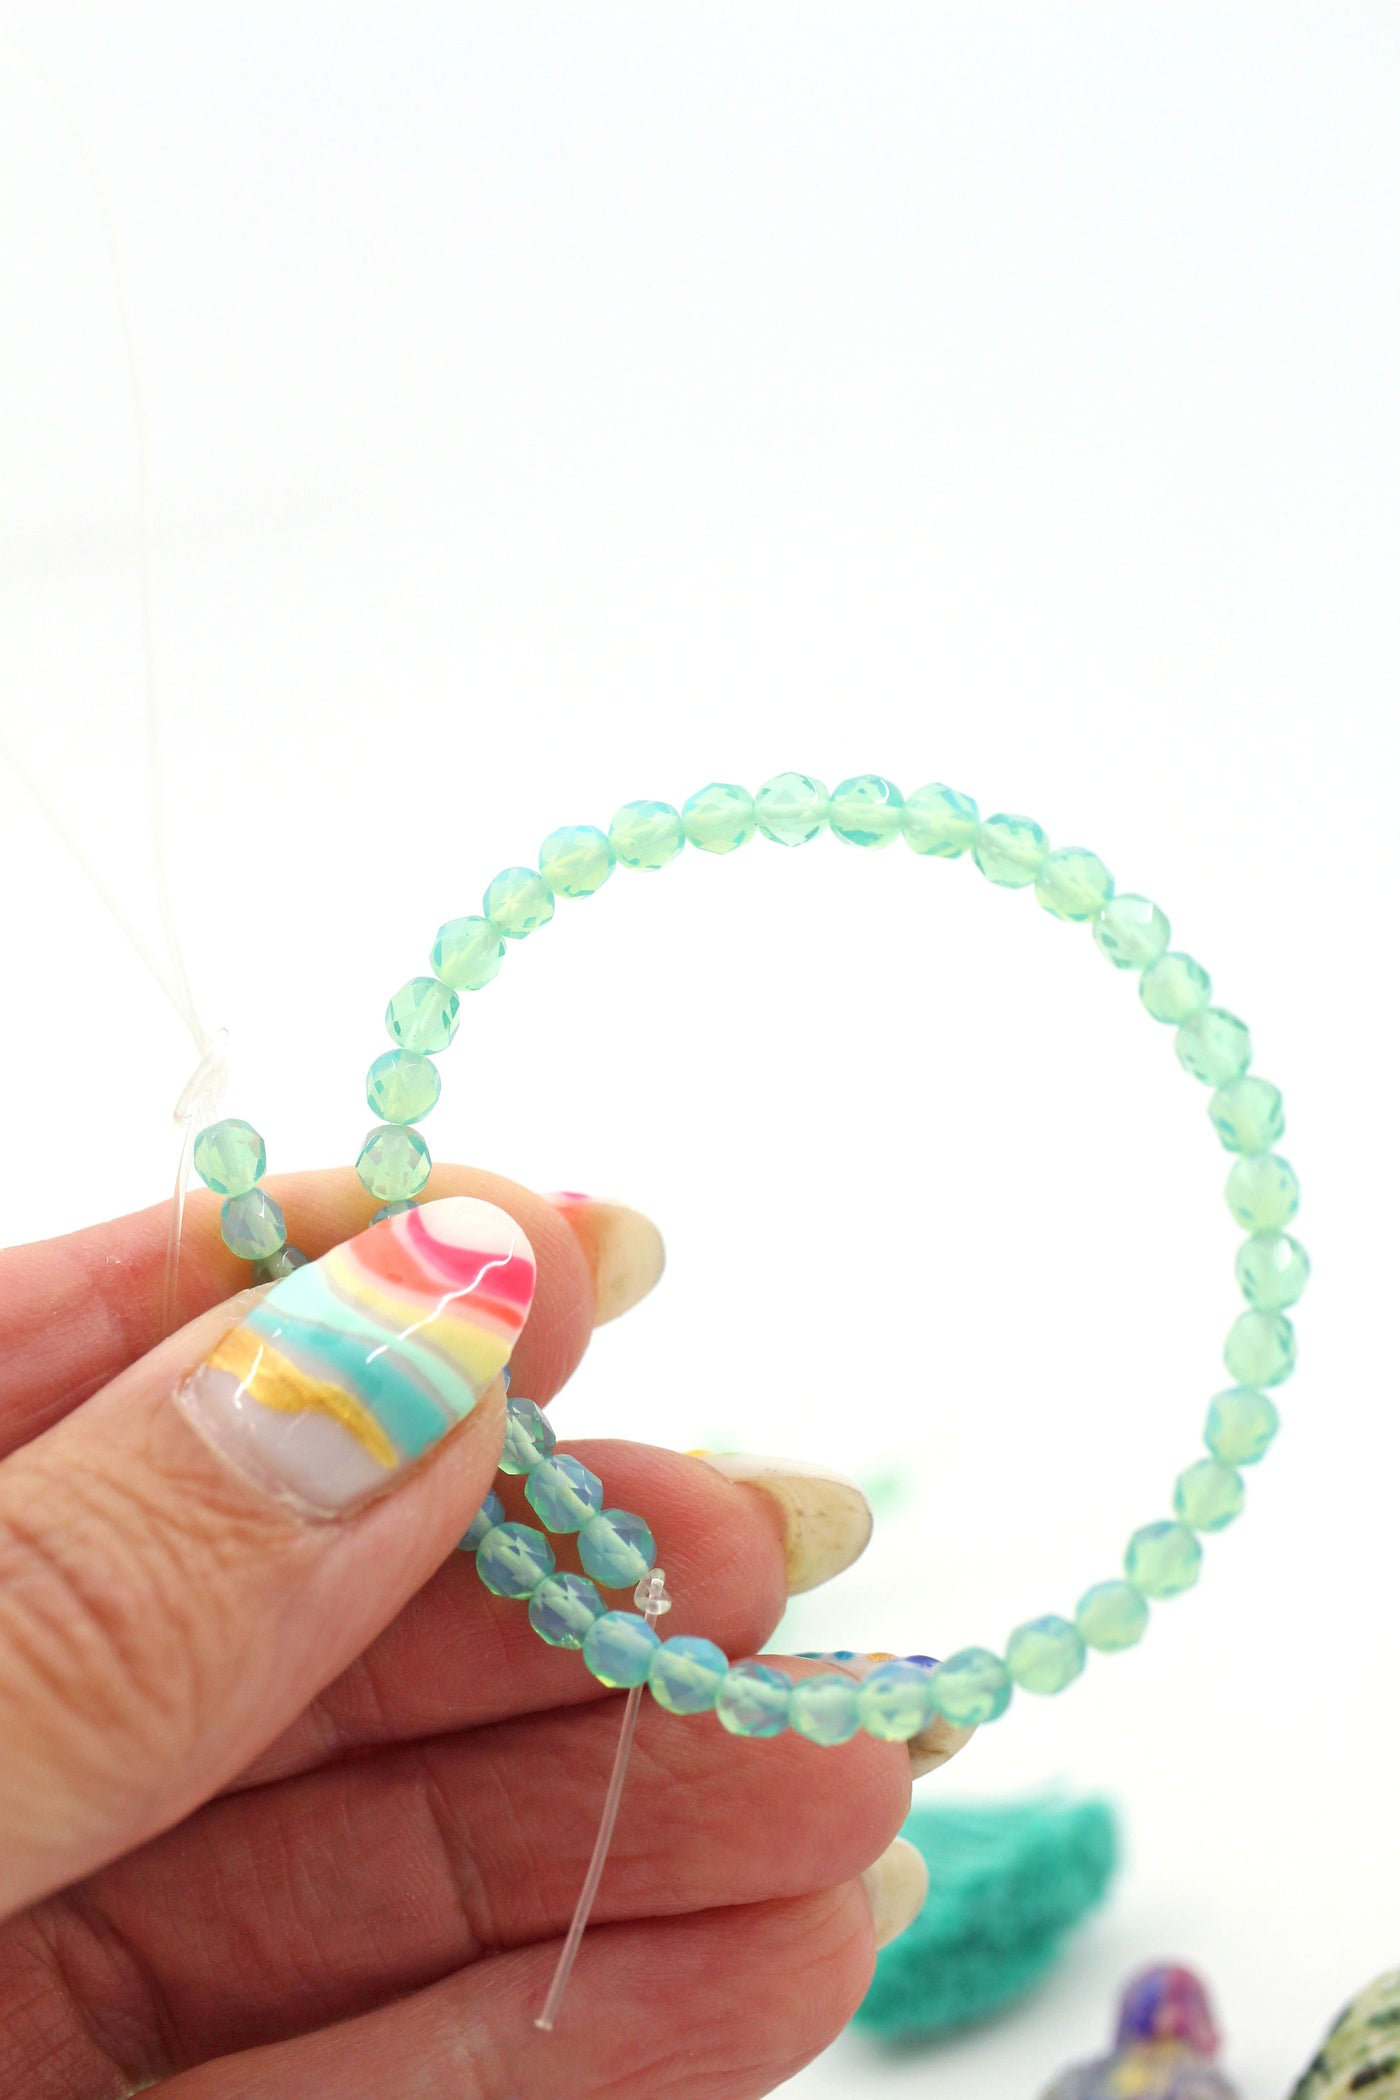 Aqua Turquoise Mermaid Opalite Glass, 4mm Faceted Beads for DIY jewelry and summer beach bracelets